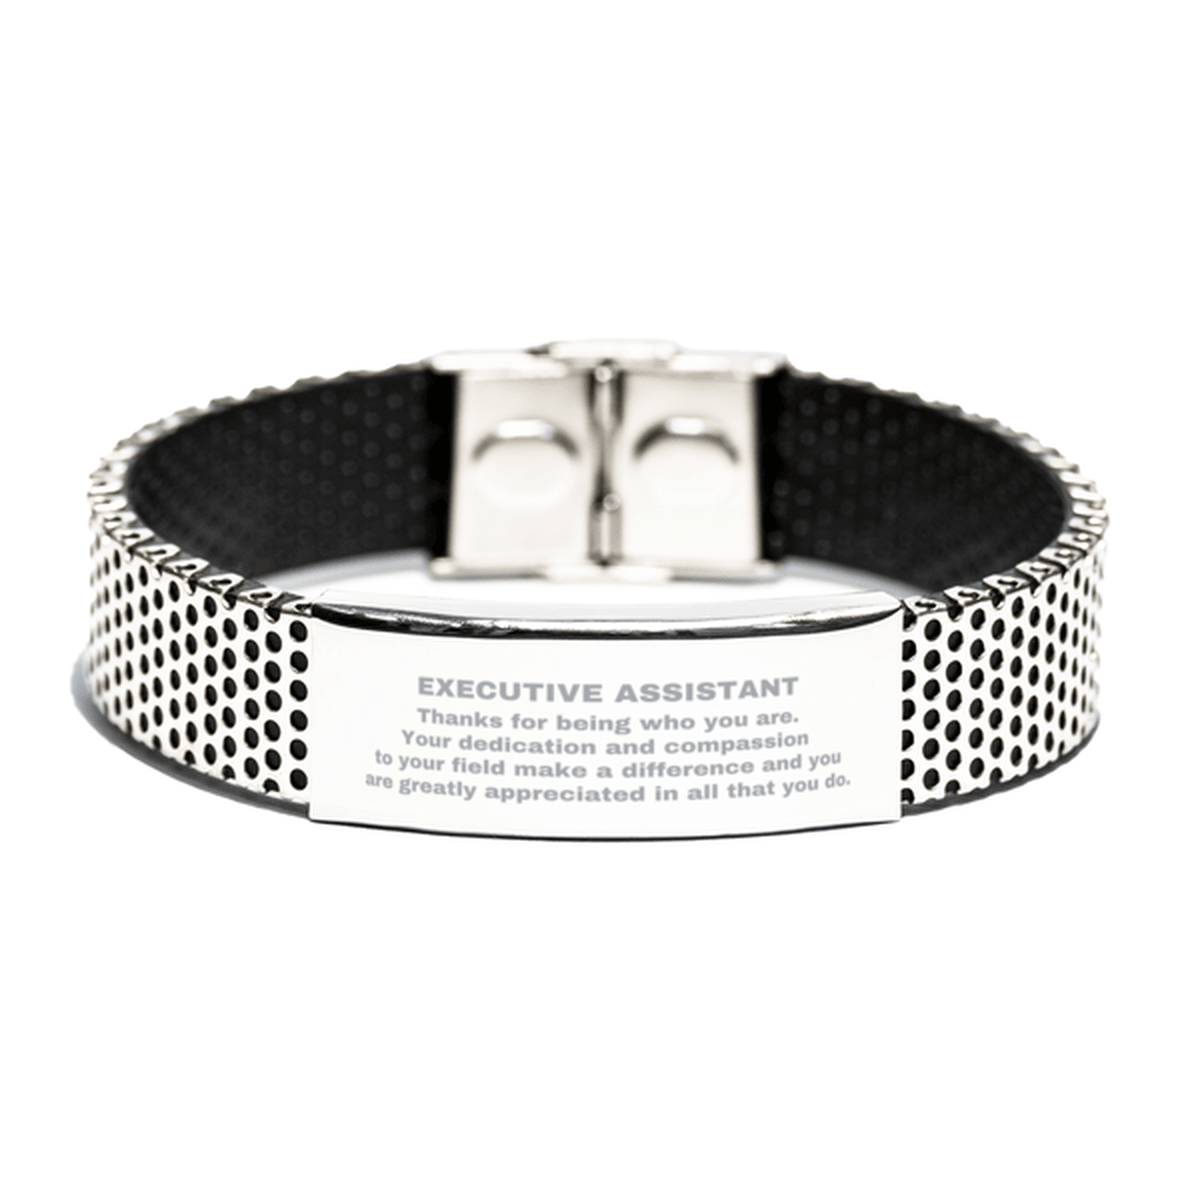 Executive Assistant Silver Shark Mesh Stainless Steel Engraved Bracelet - Thanks for being who you are - Birthday Christmas Jewelry Gifts Coworkers Colleague Boss - Mallard Moon Gift Shop